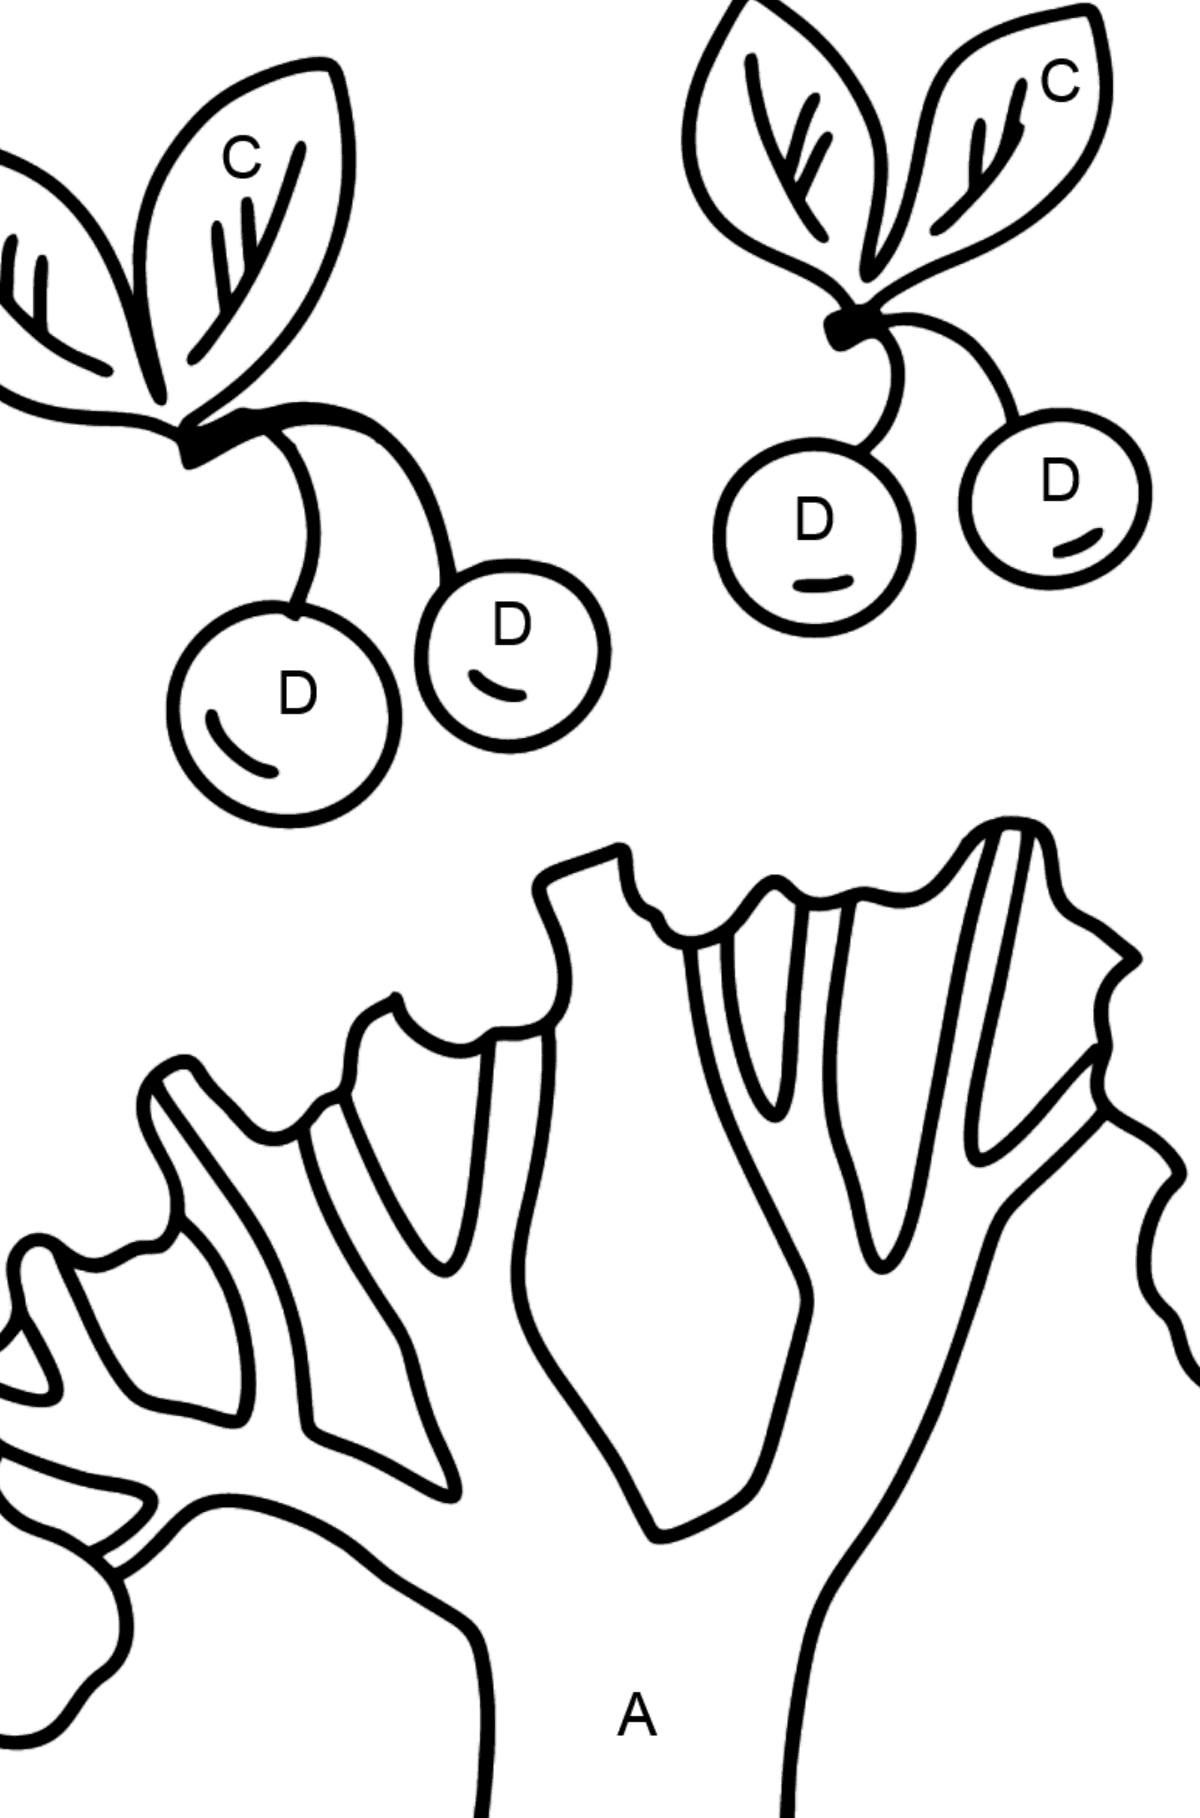 Cherry Tree coloring page - Coloring by Letters for Kids